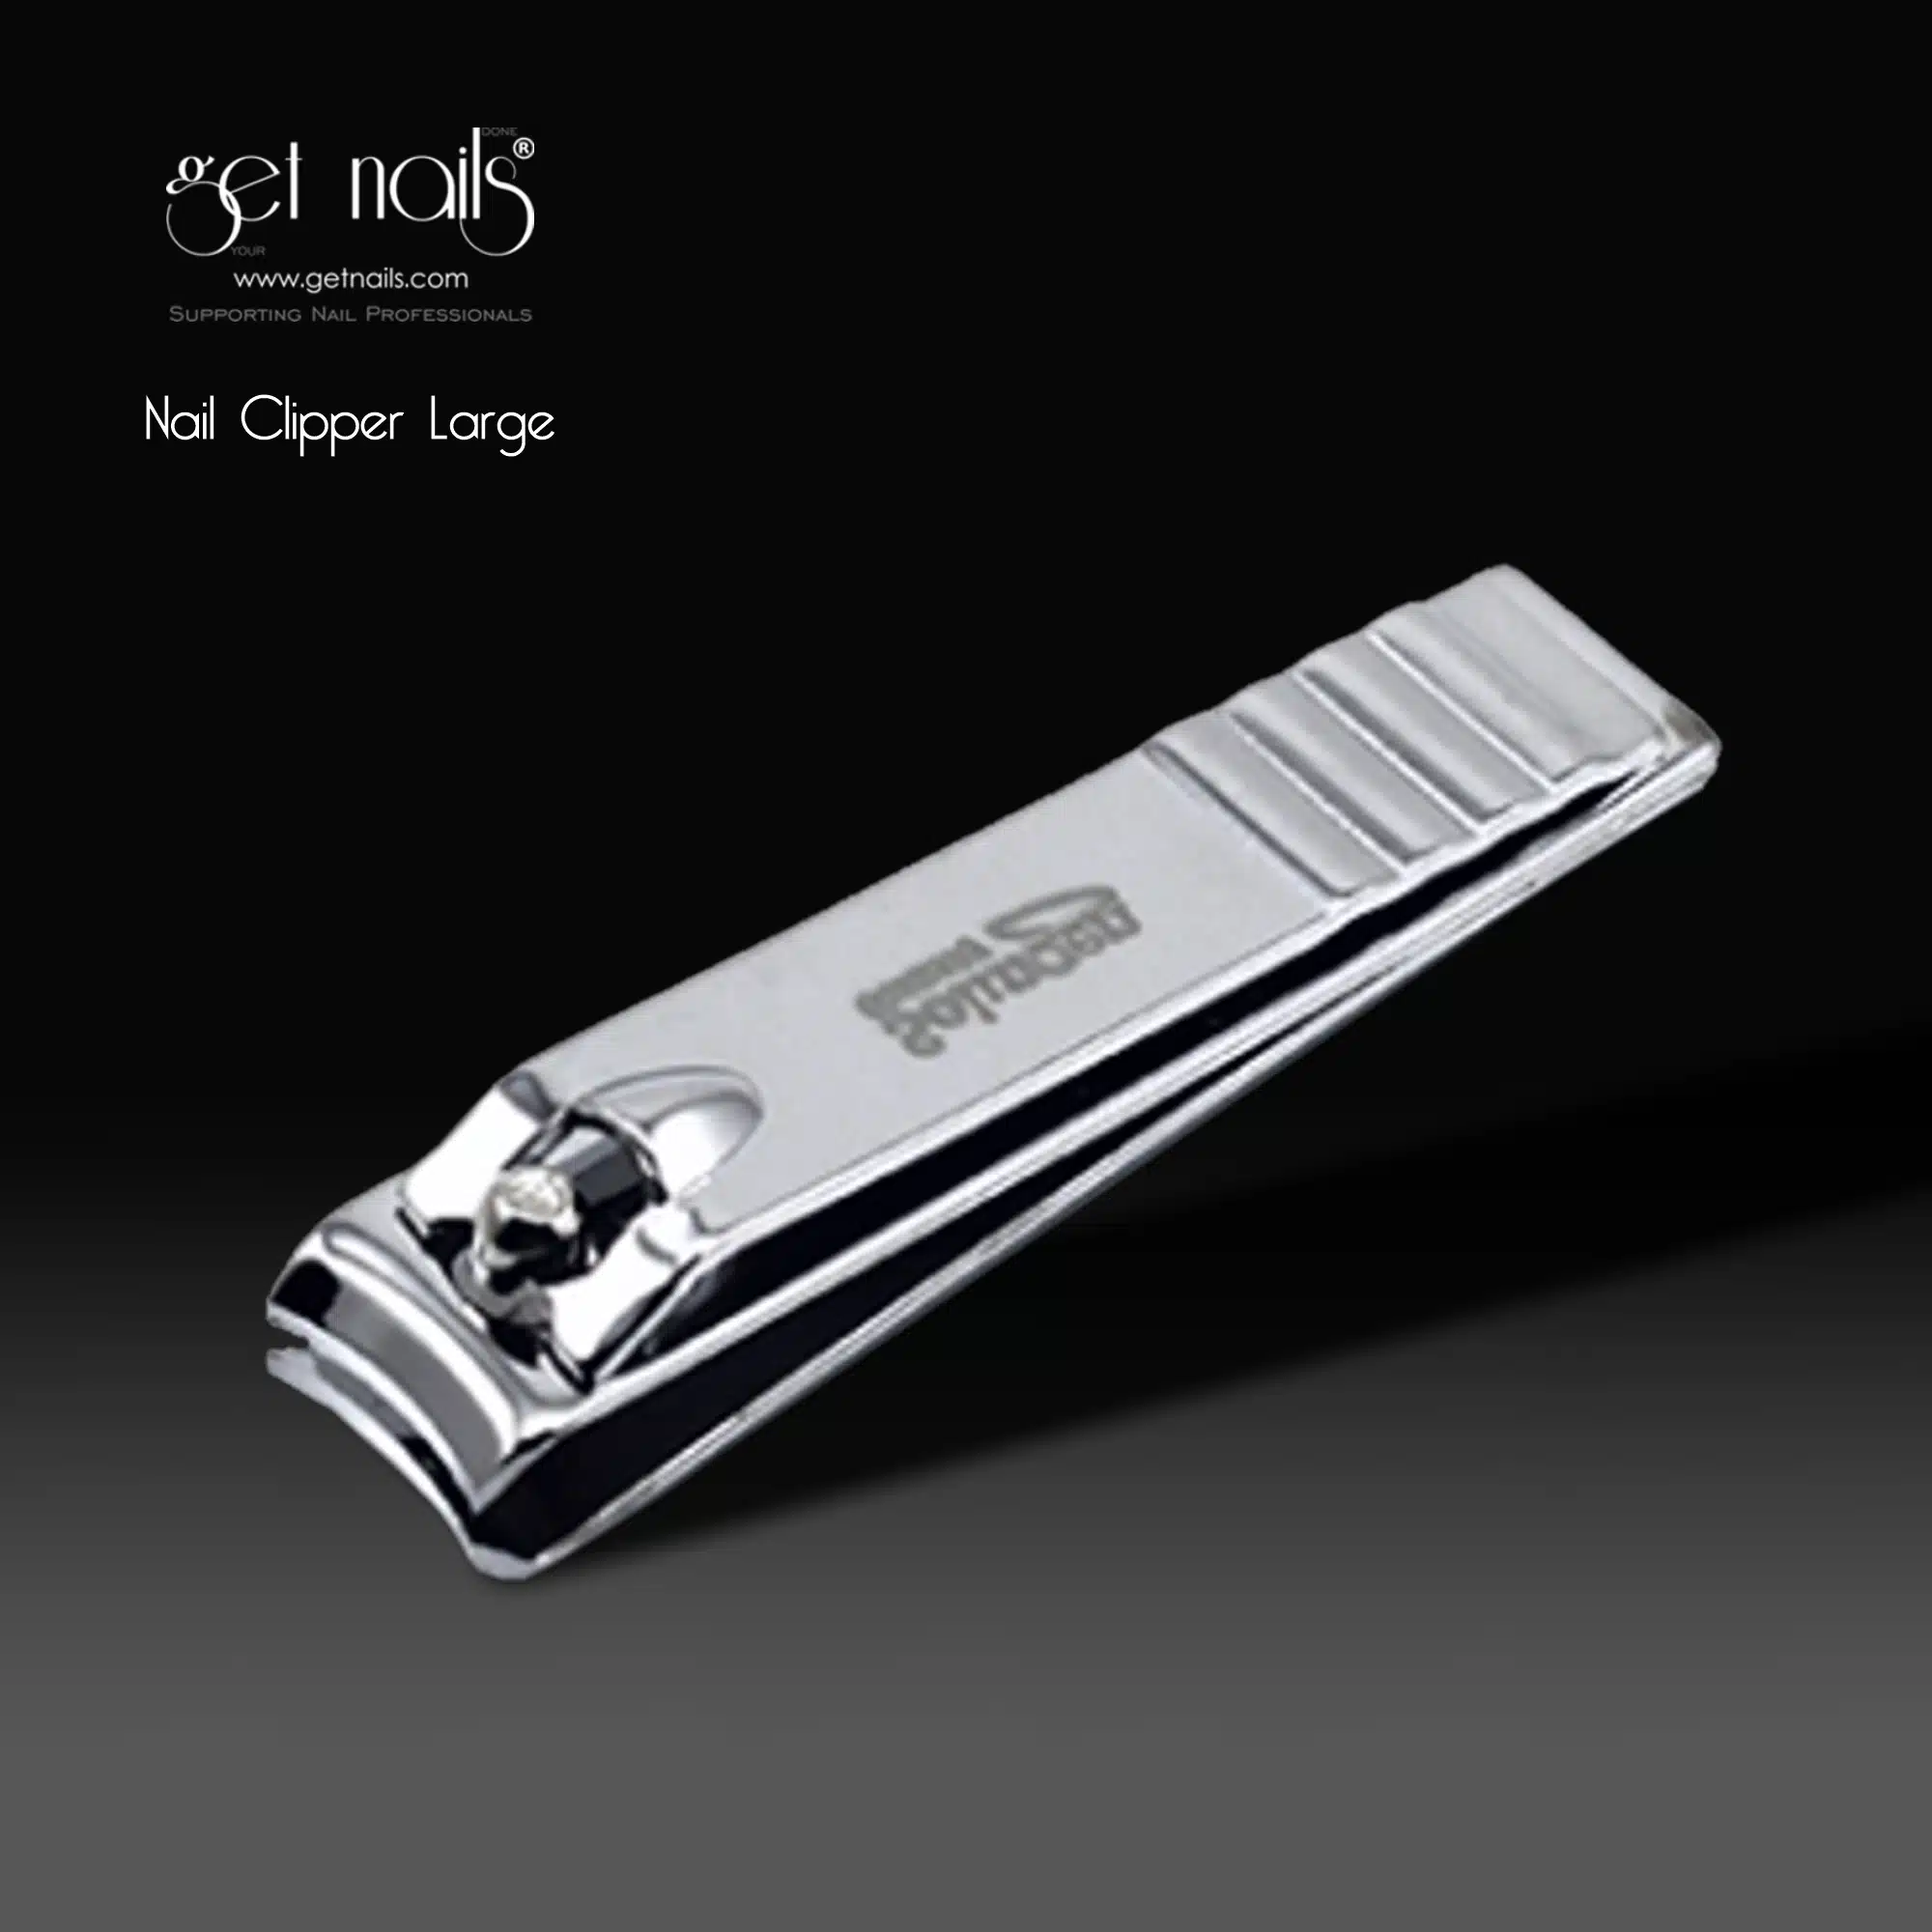 Get Nails Austria - Nail clippers large